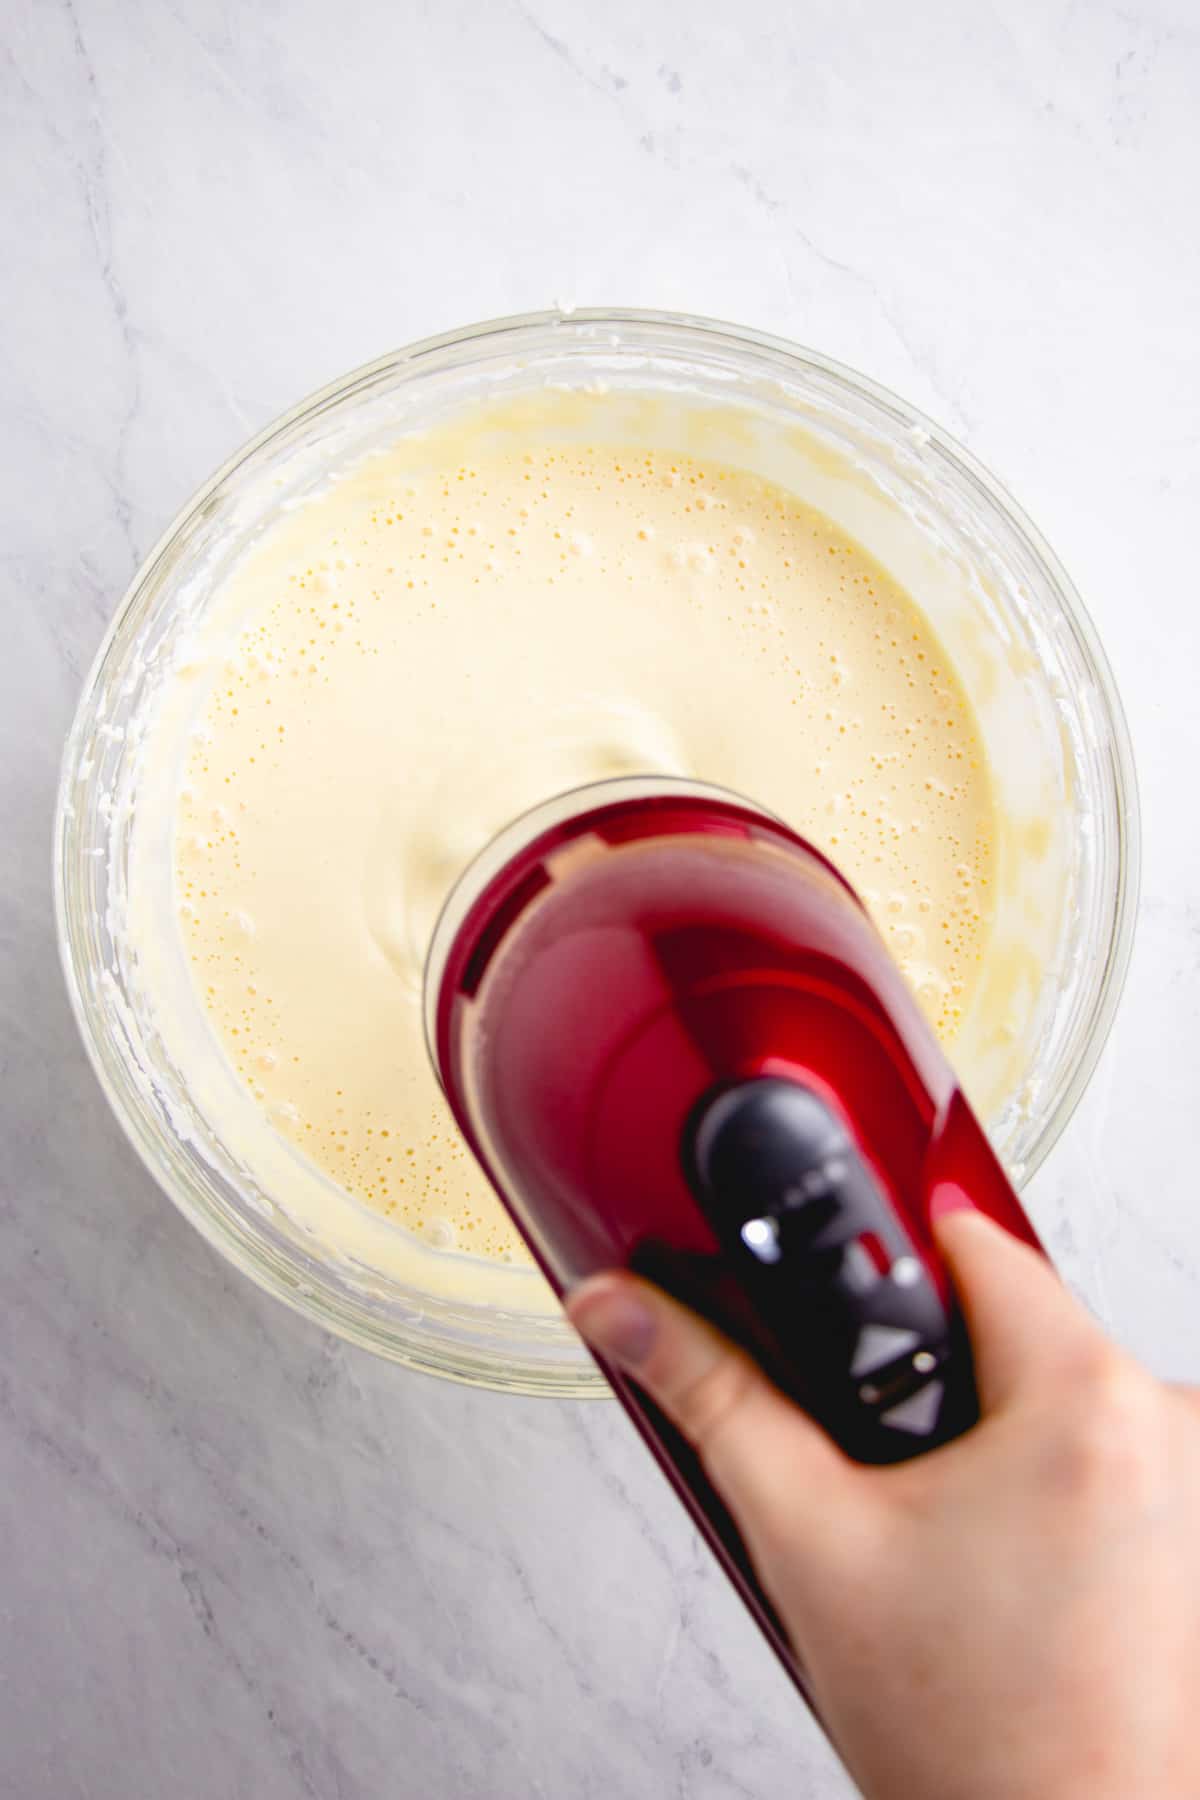 Mixing cheesecake filling with a hand mixer.